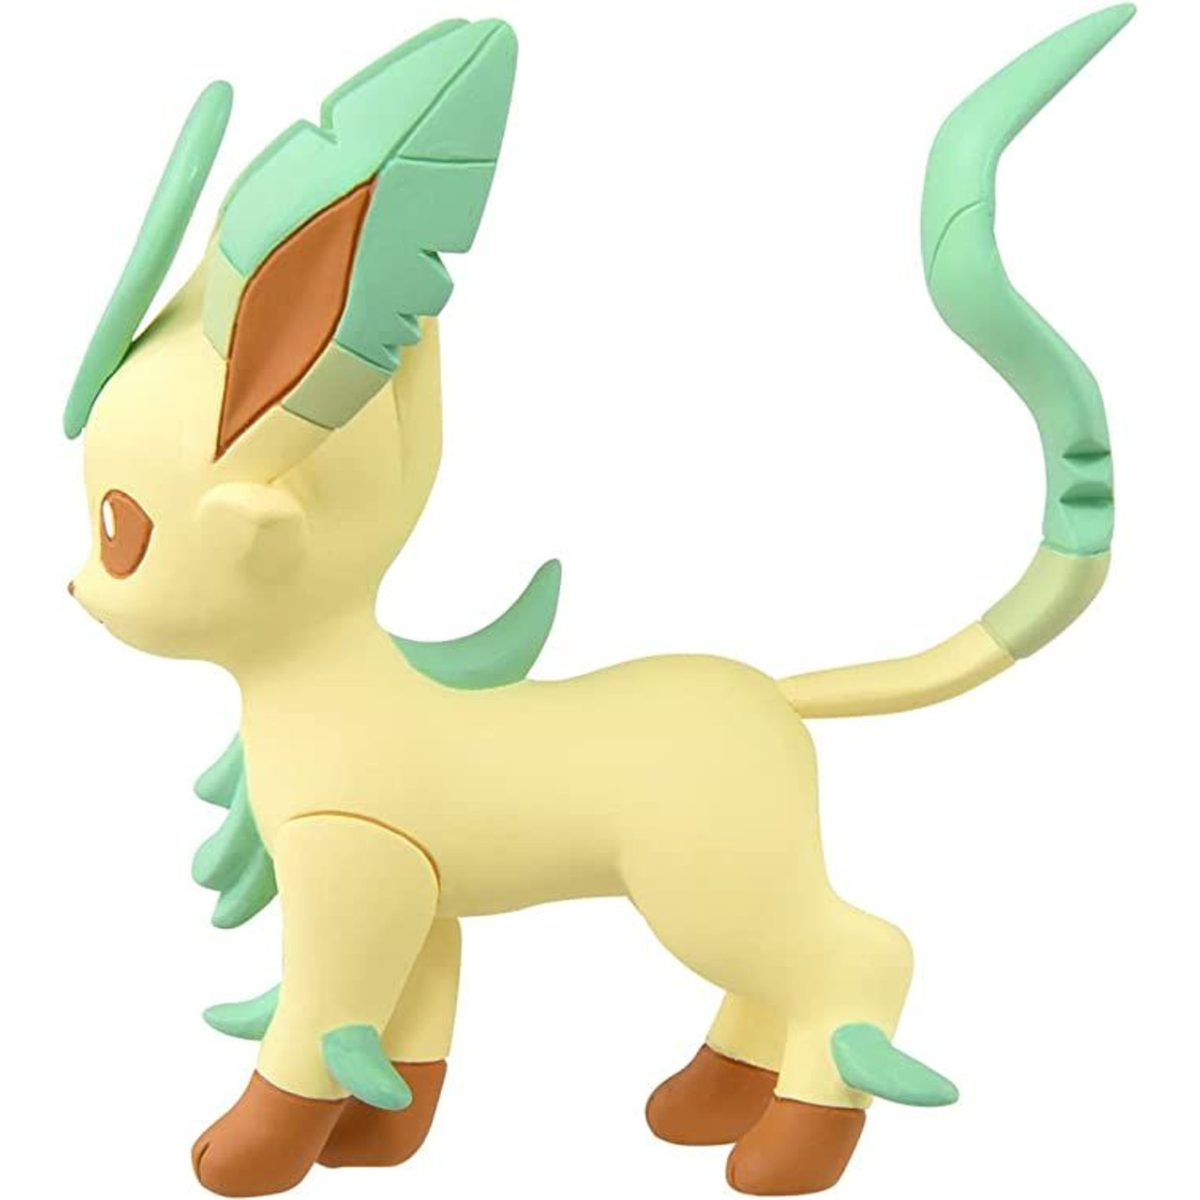 Pokemon Moncolle "Leafeon" (MS)-Takara Tomy-Ace Cards & Collectibles